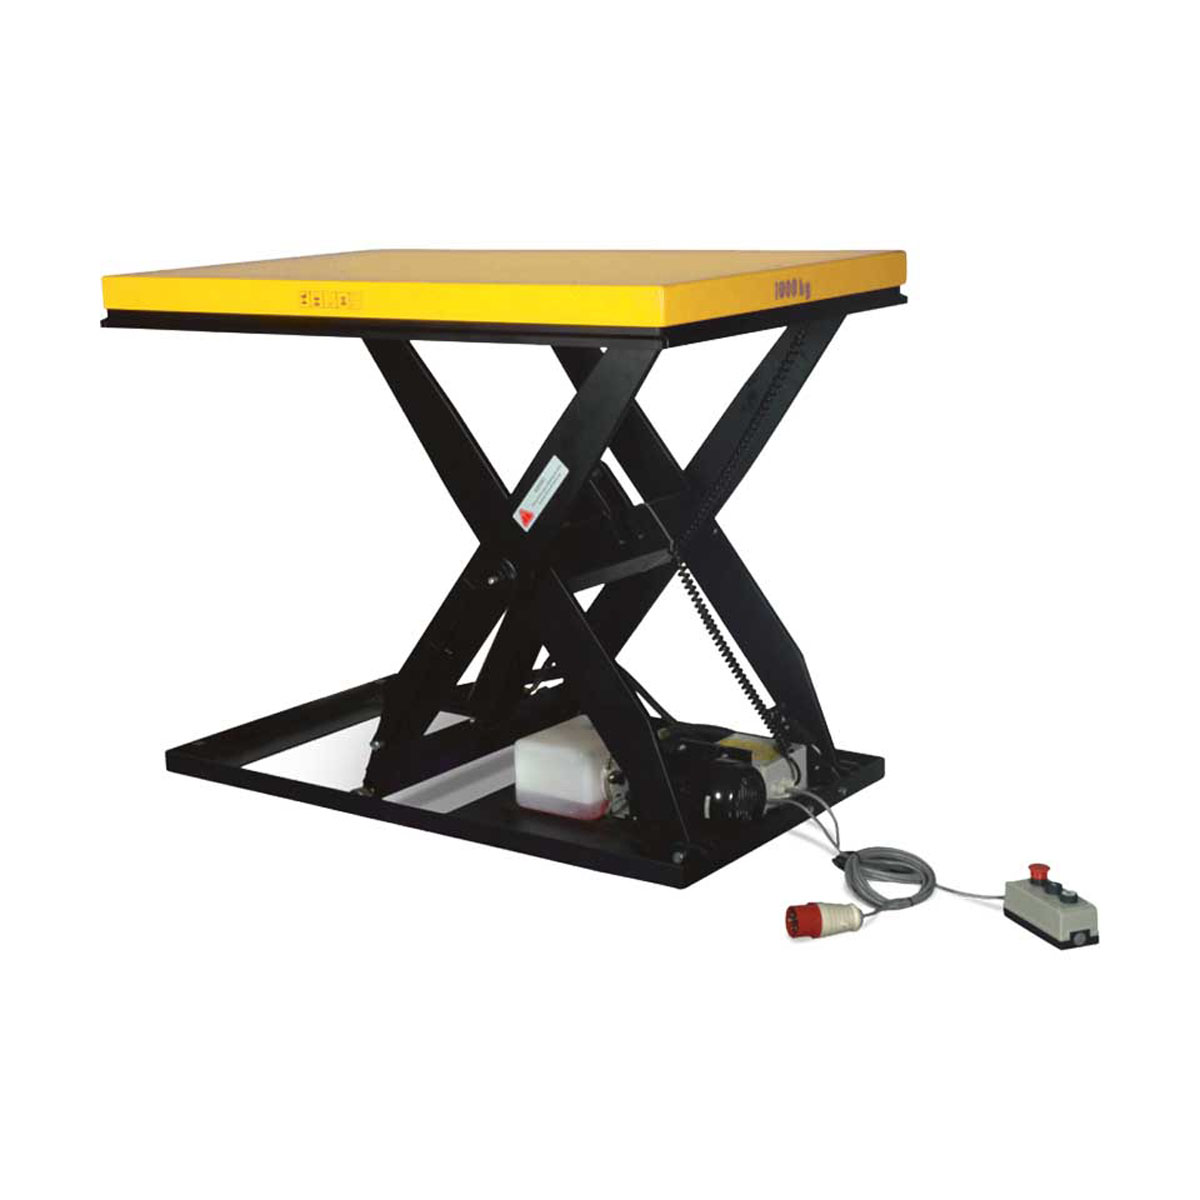 Scissor Lift Table Entry-level (Electric)